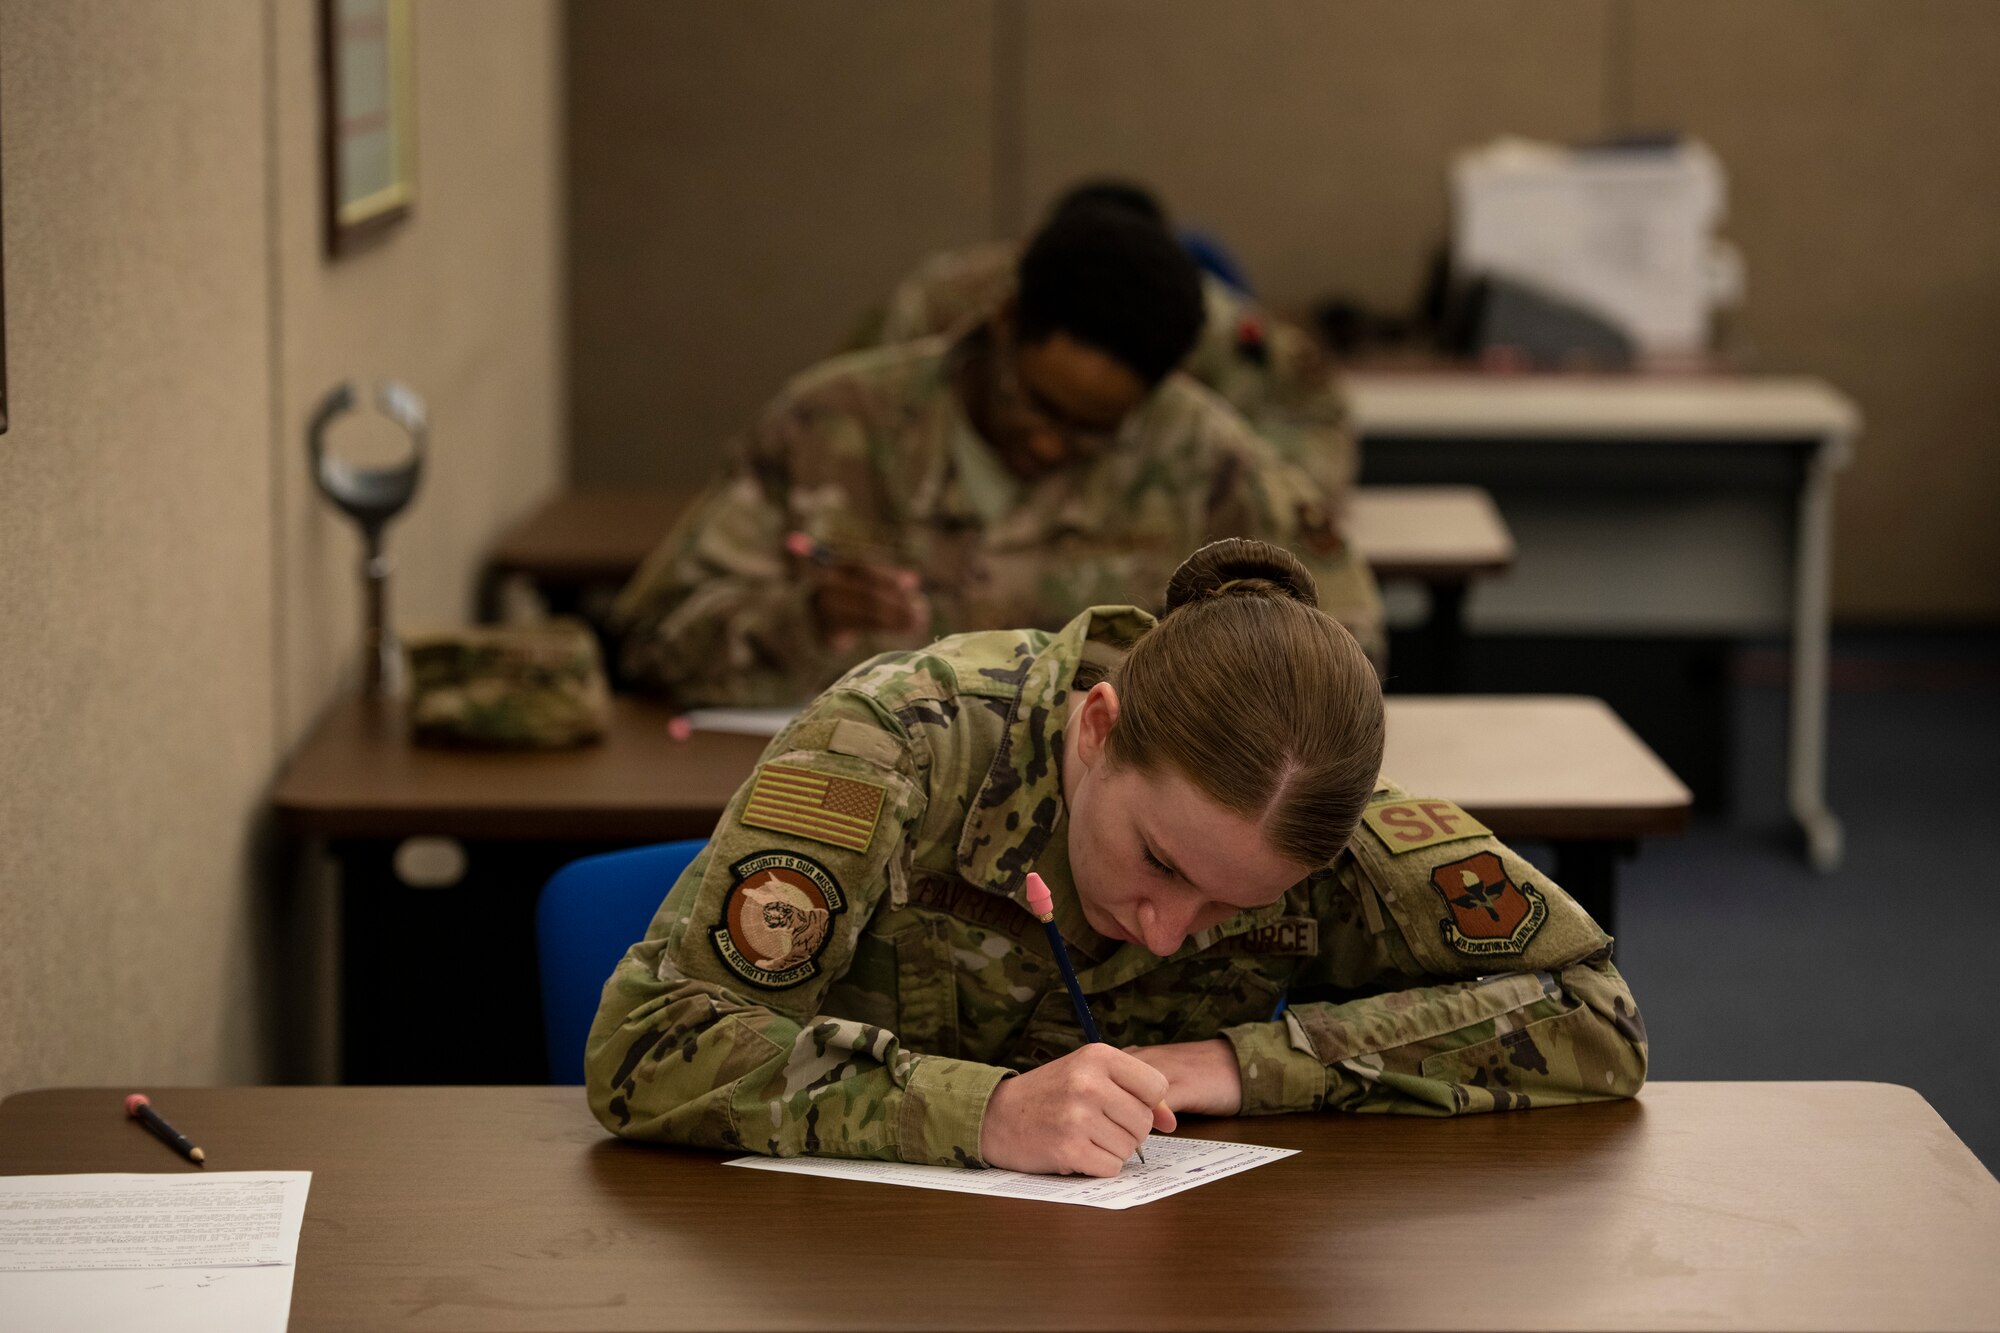 U.S. Air Force Senior Airman Jewel Favreau, assigned to the 97th Security Forces Squadron, fills out a promotion testing form, May 20, 2020 at Altus Air Force Base, Oklahoma